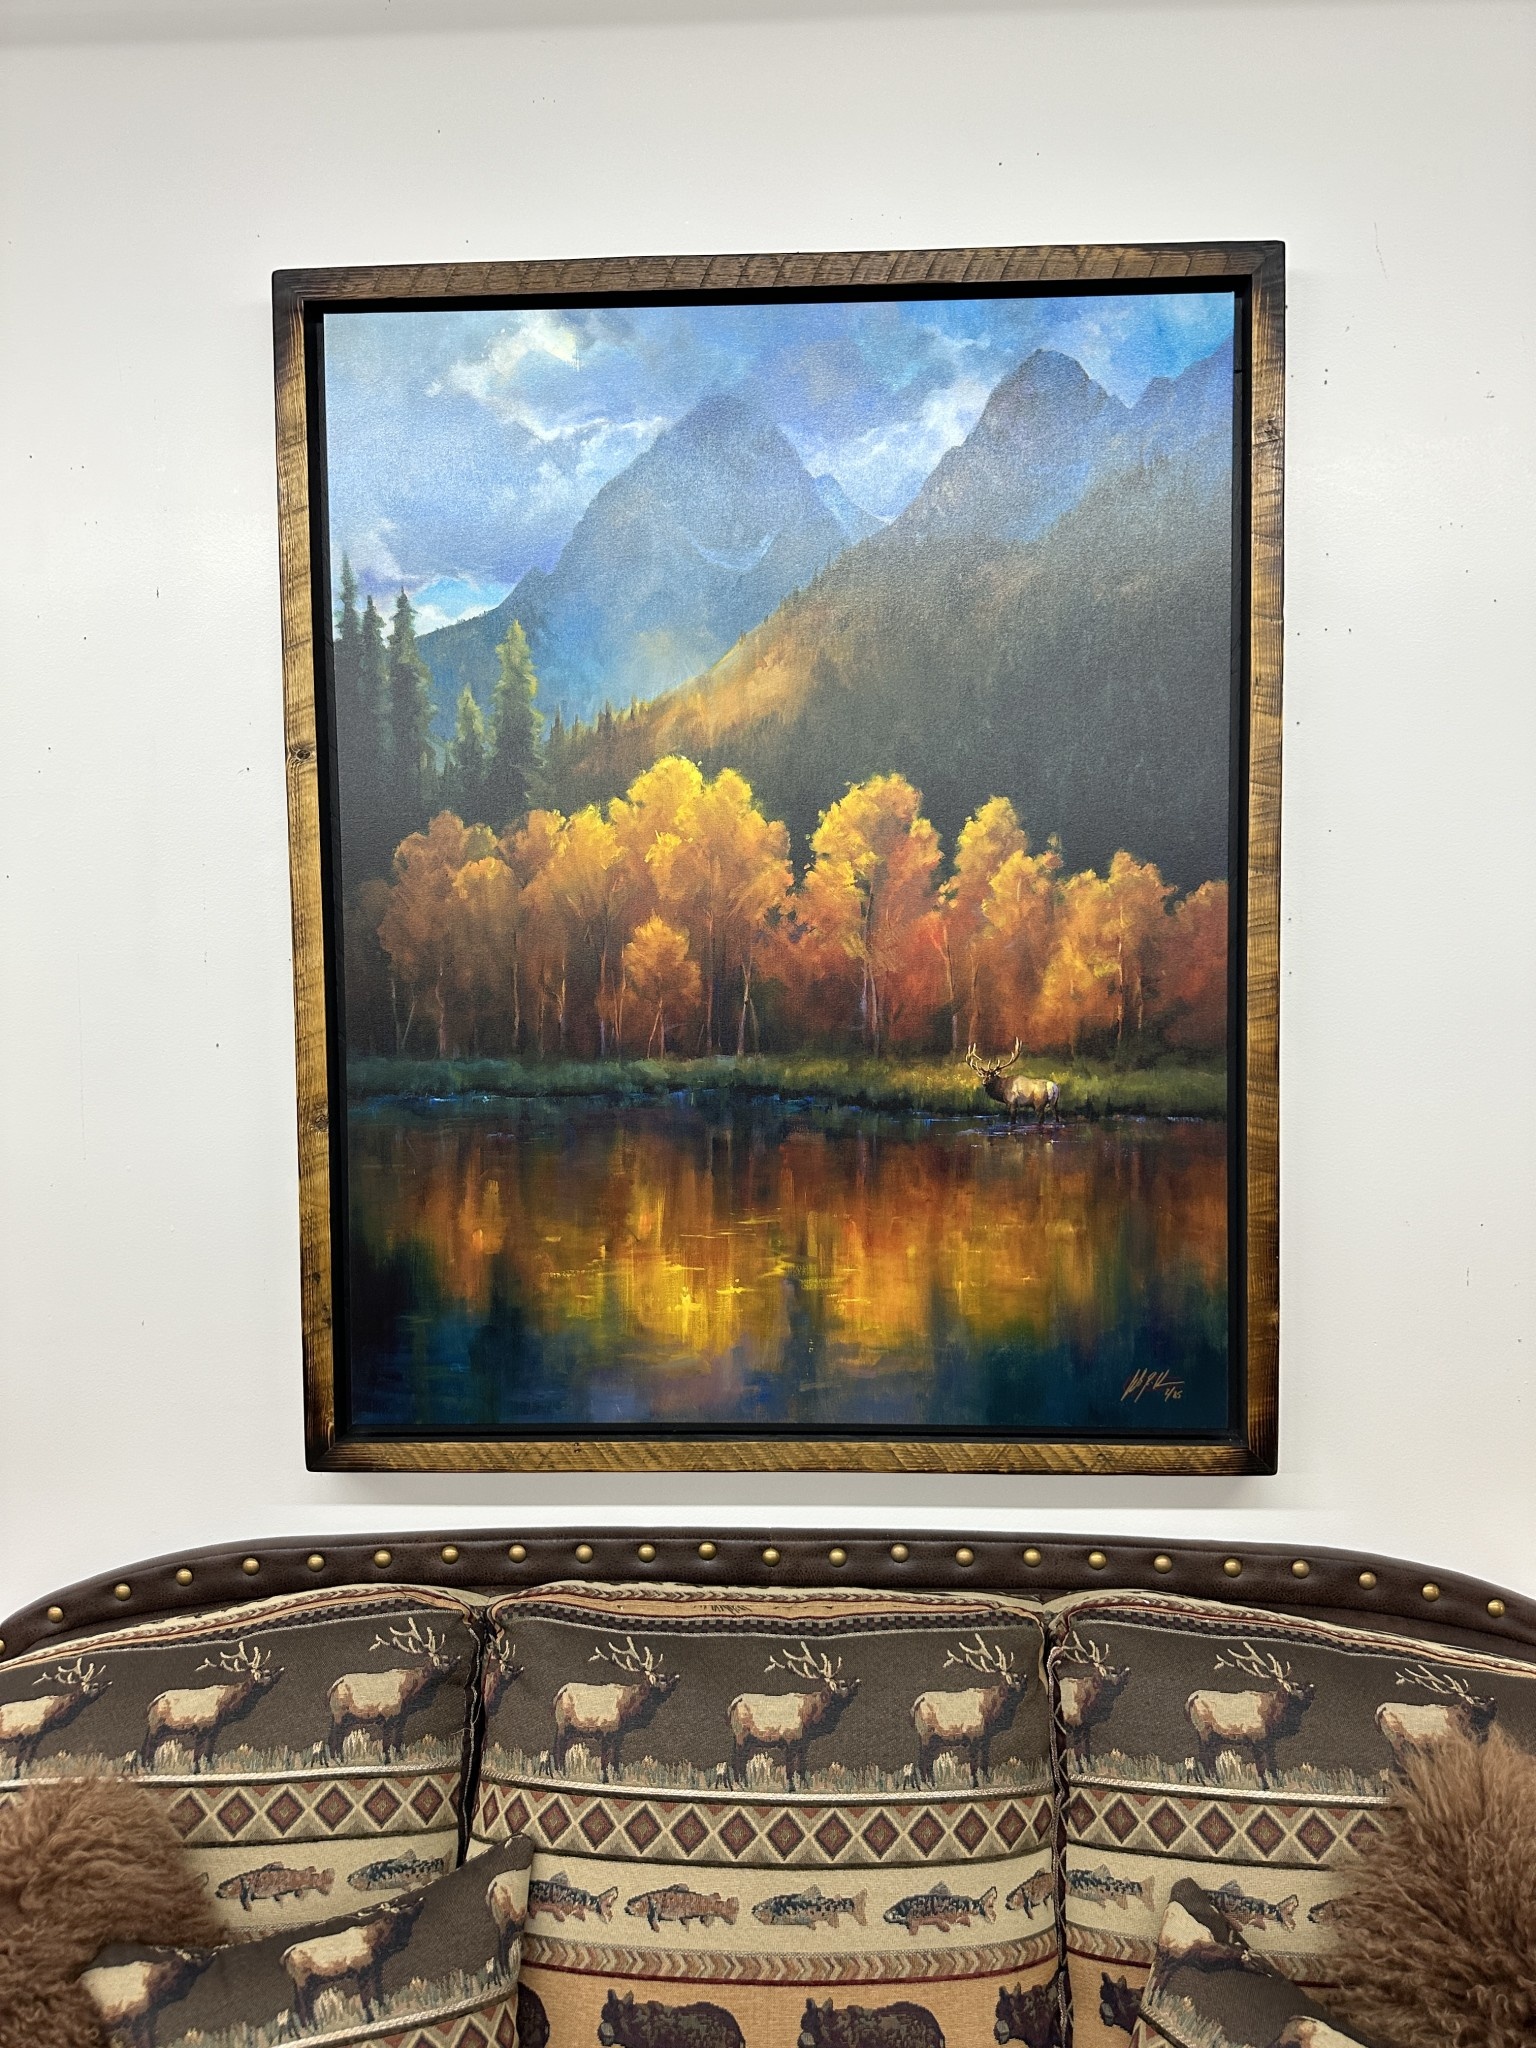 Colt Idol "Forest Echoes" Framed 44x54